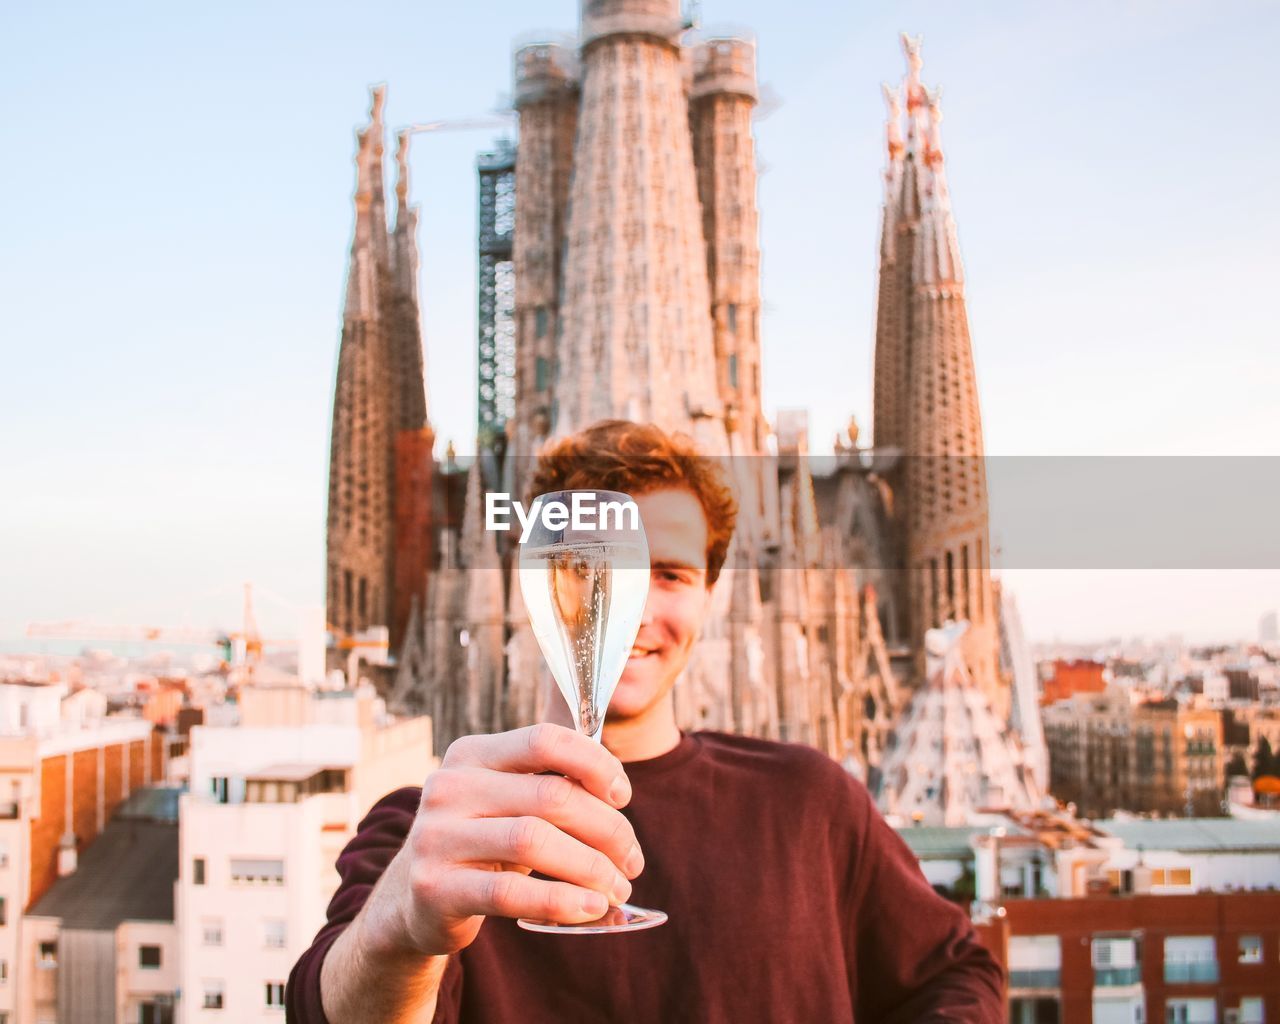 Man holding up a glass of champagne in front of sagrada familia